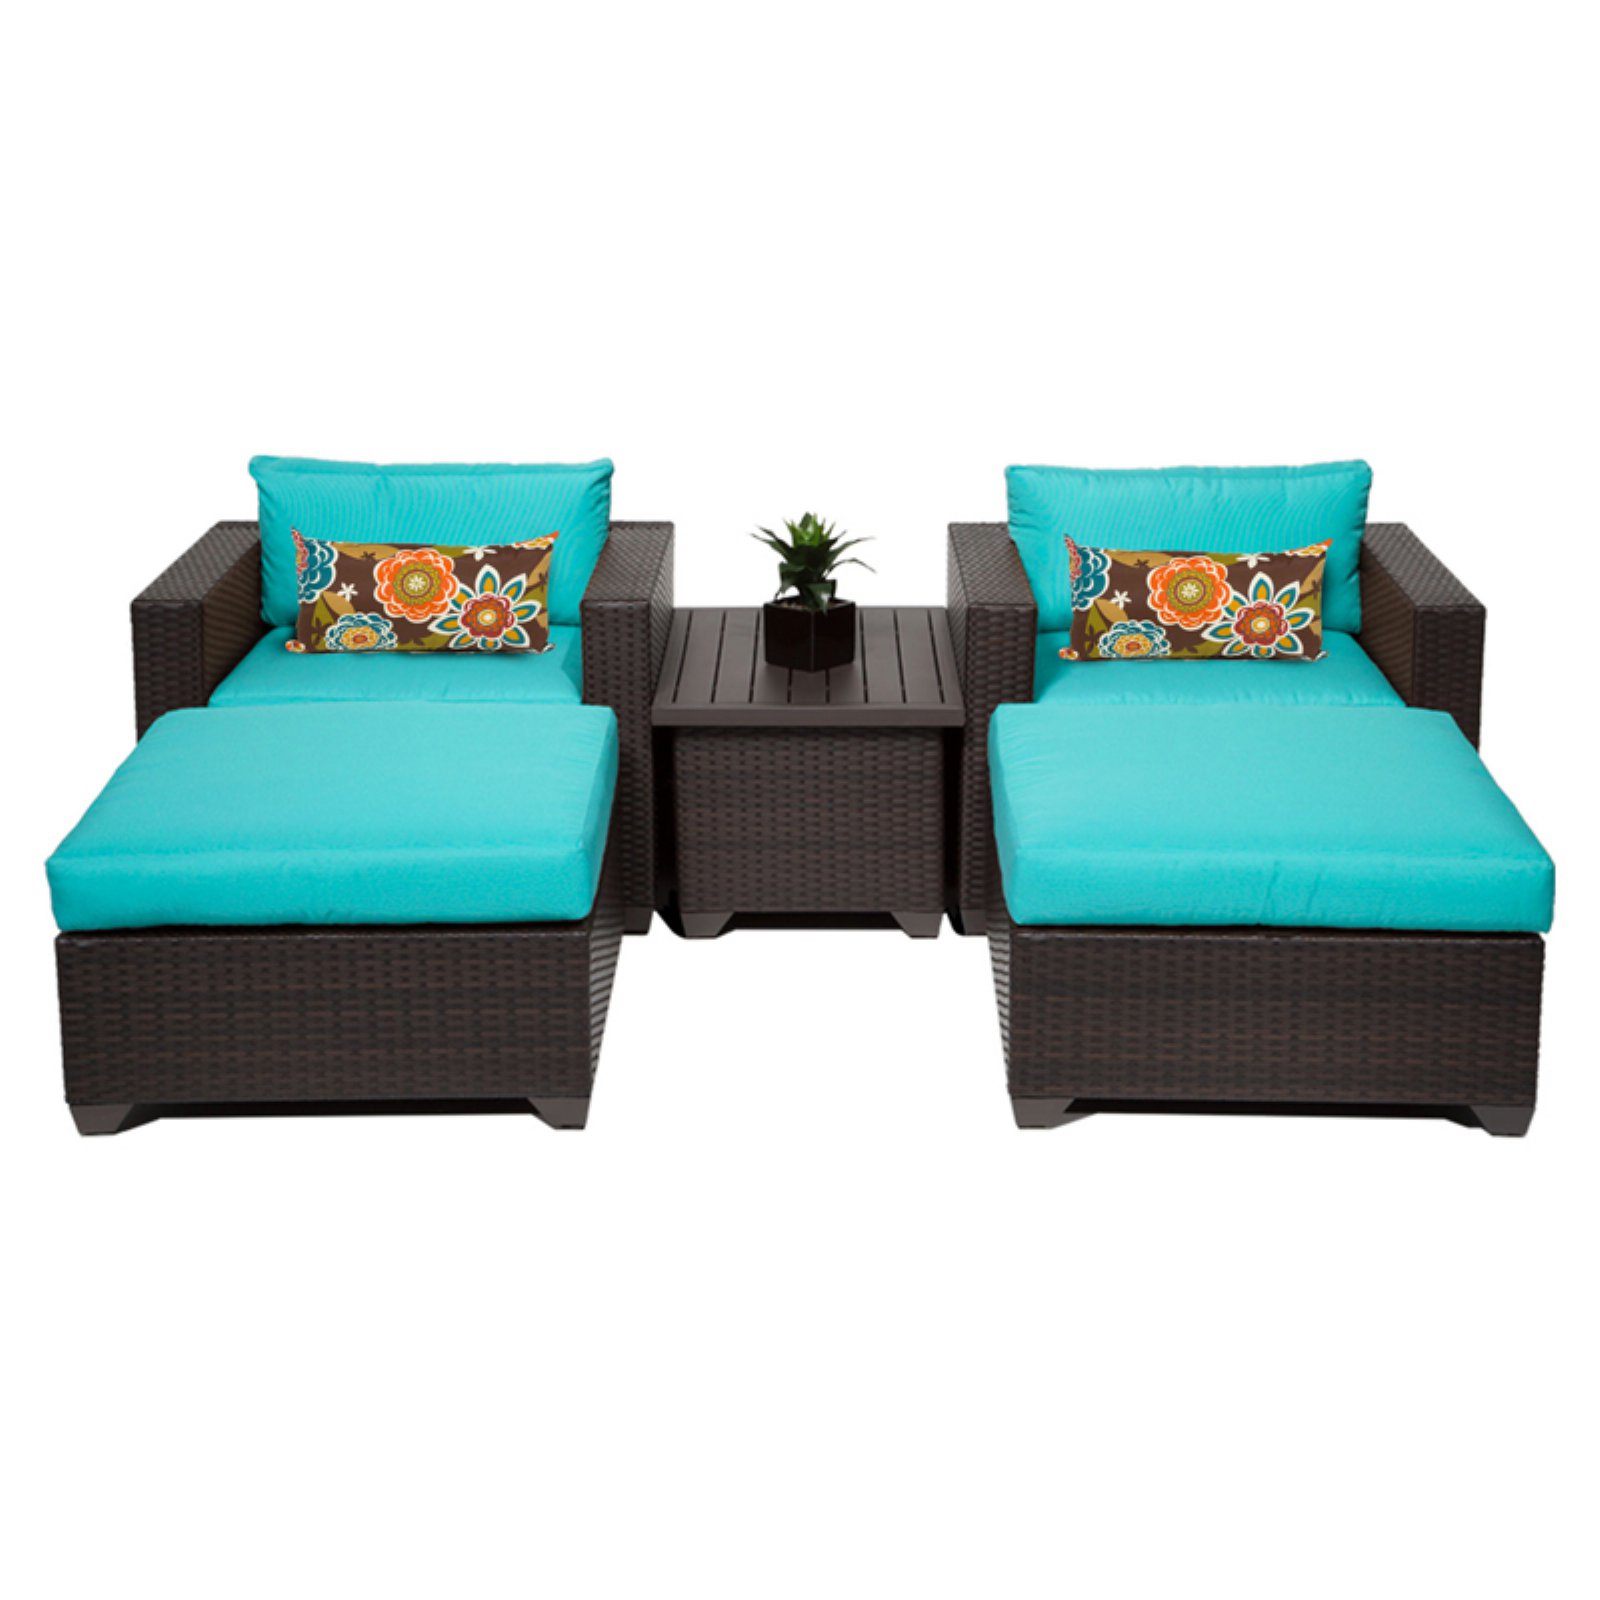 TK Classics Belle Wicker 5 Piece Patio Conversation Set with Ottoman and 2 Sets of Cushion Covers - image 2 of 2